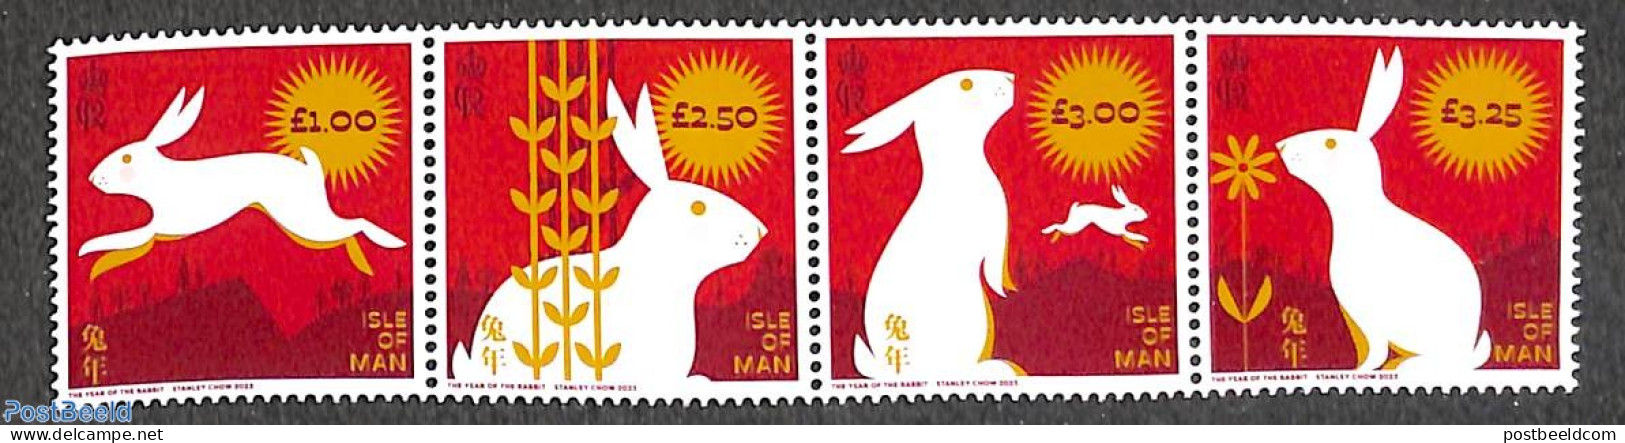 Isle Of Man 2023 Year Of The Rabbit 4v [:::], Mint NH, Nature - Various - Rabbits / Hares - New Year - Anno Nuovo